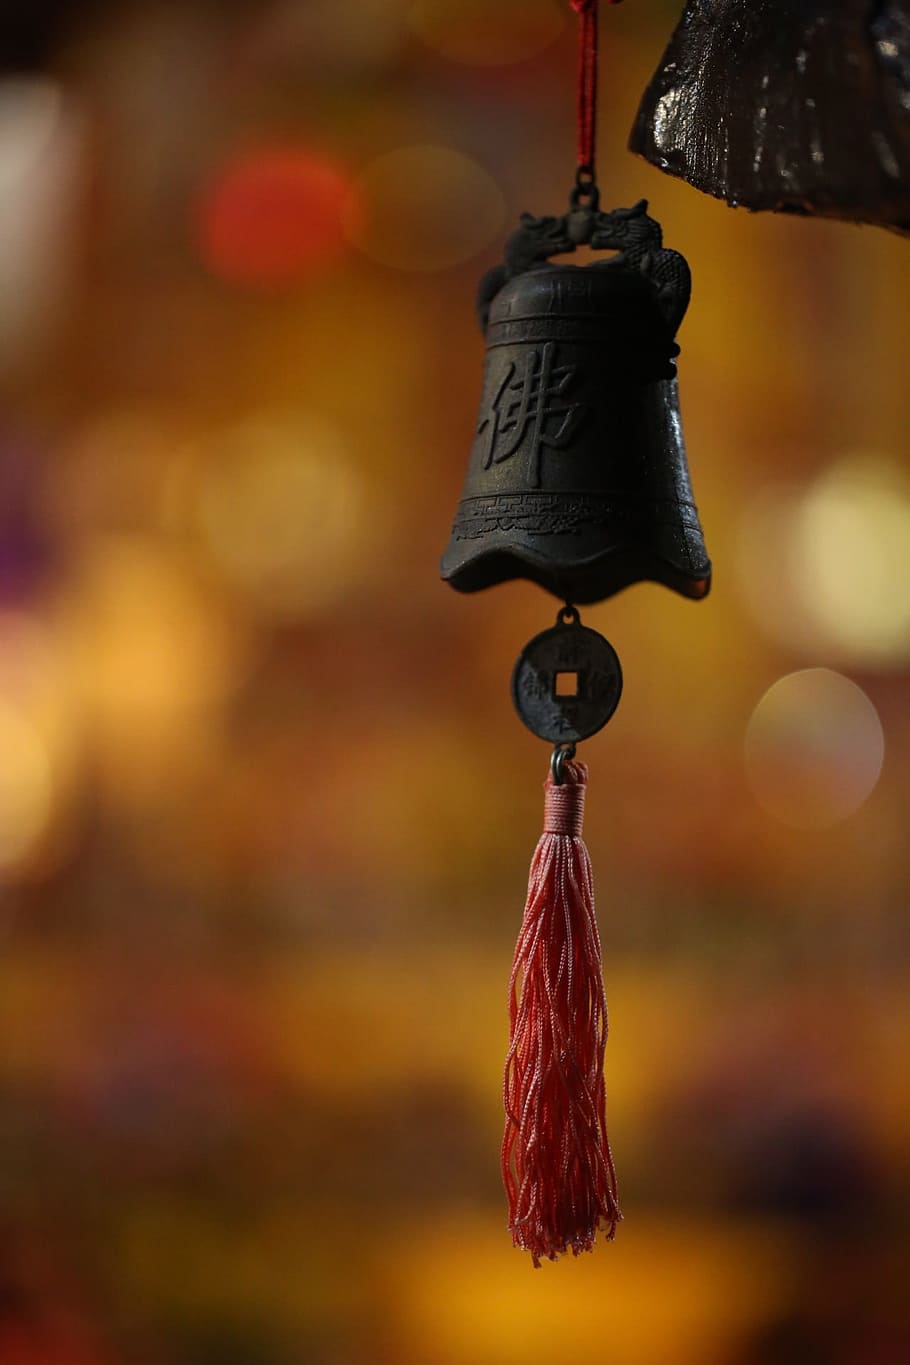 buddhism, angle ring, religion, hanging, focus on foreground